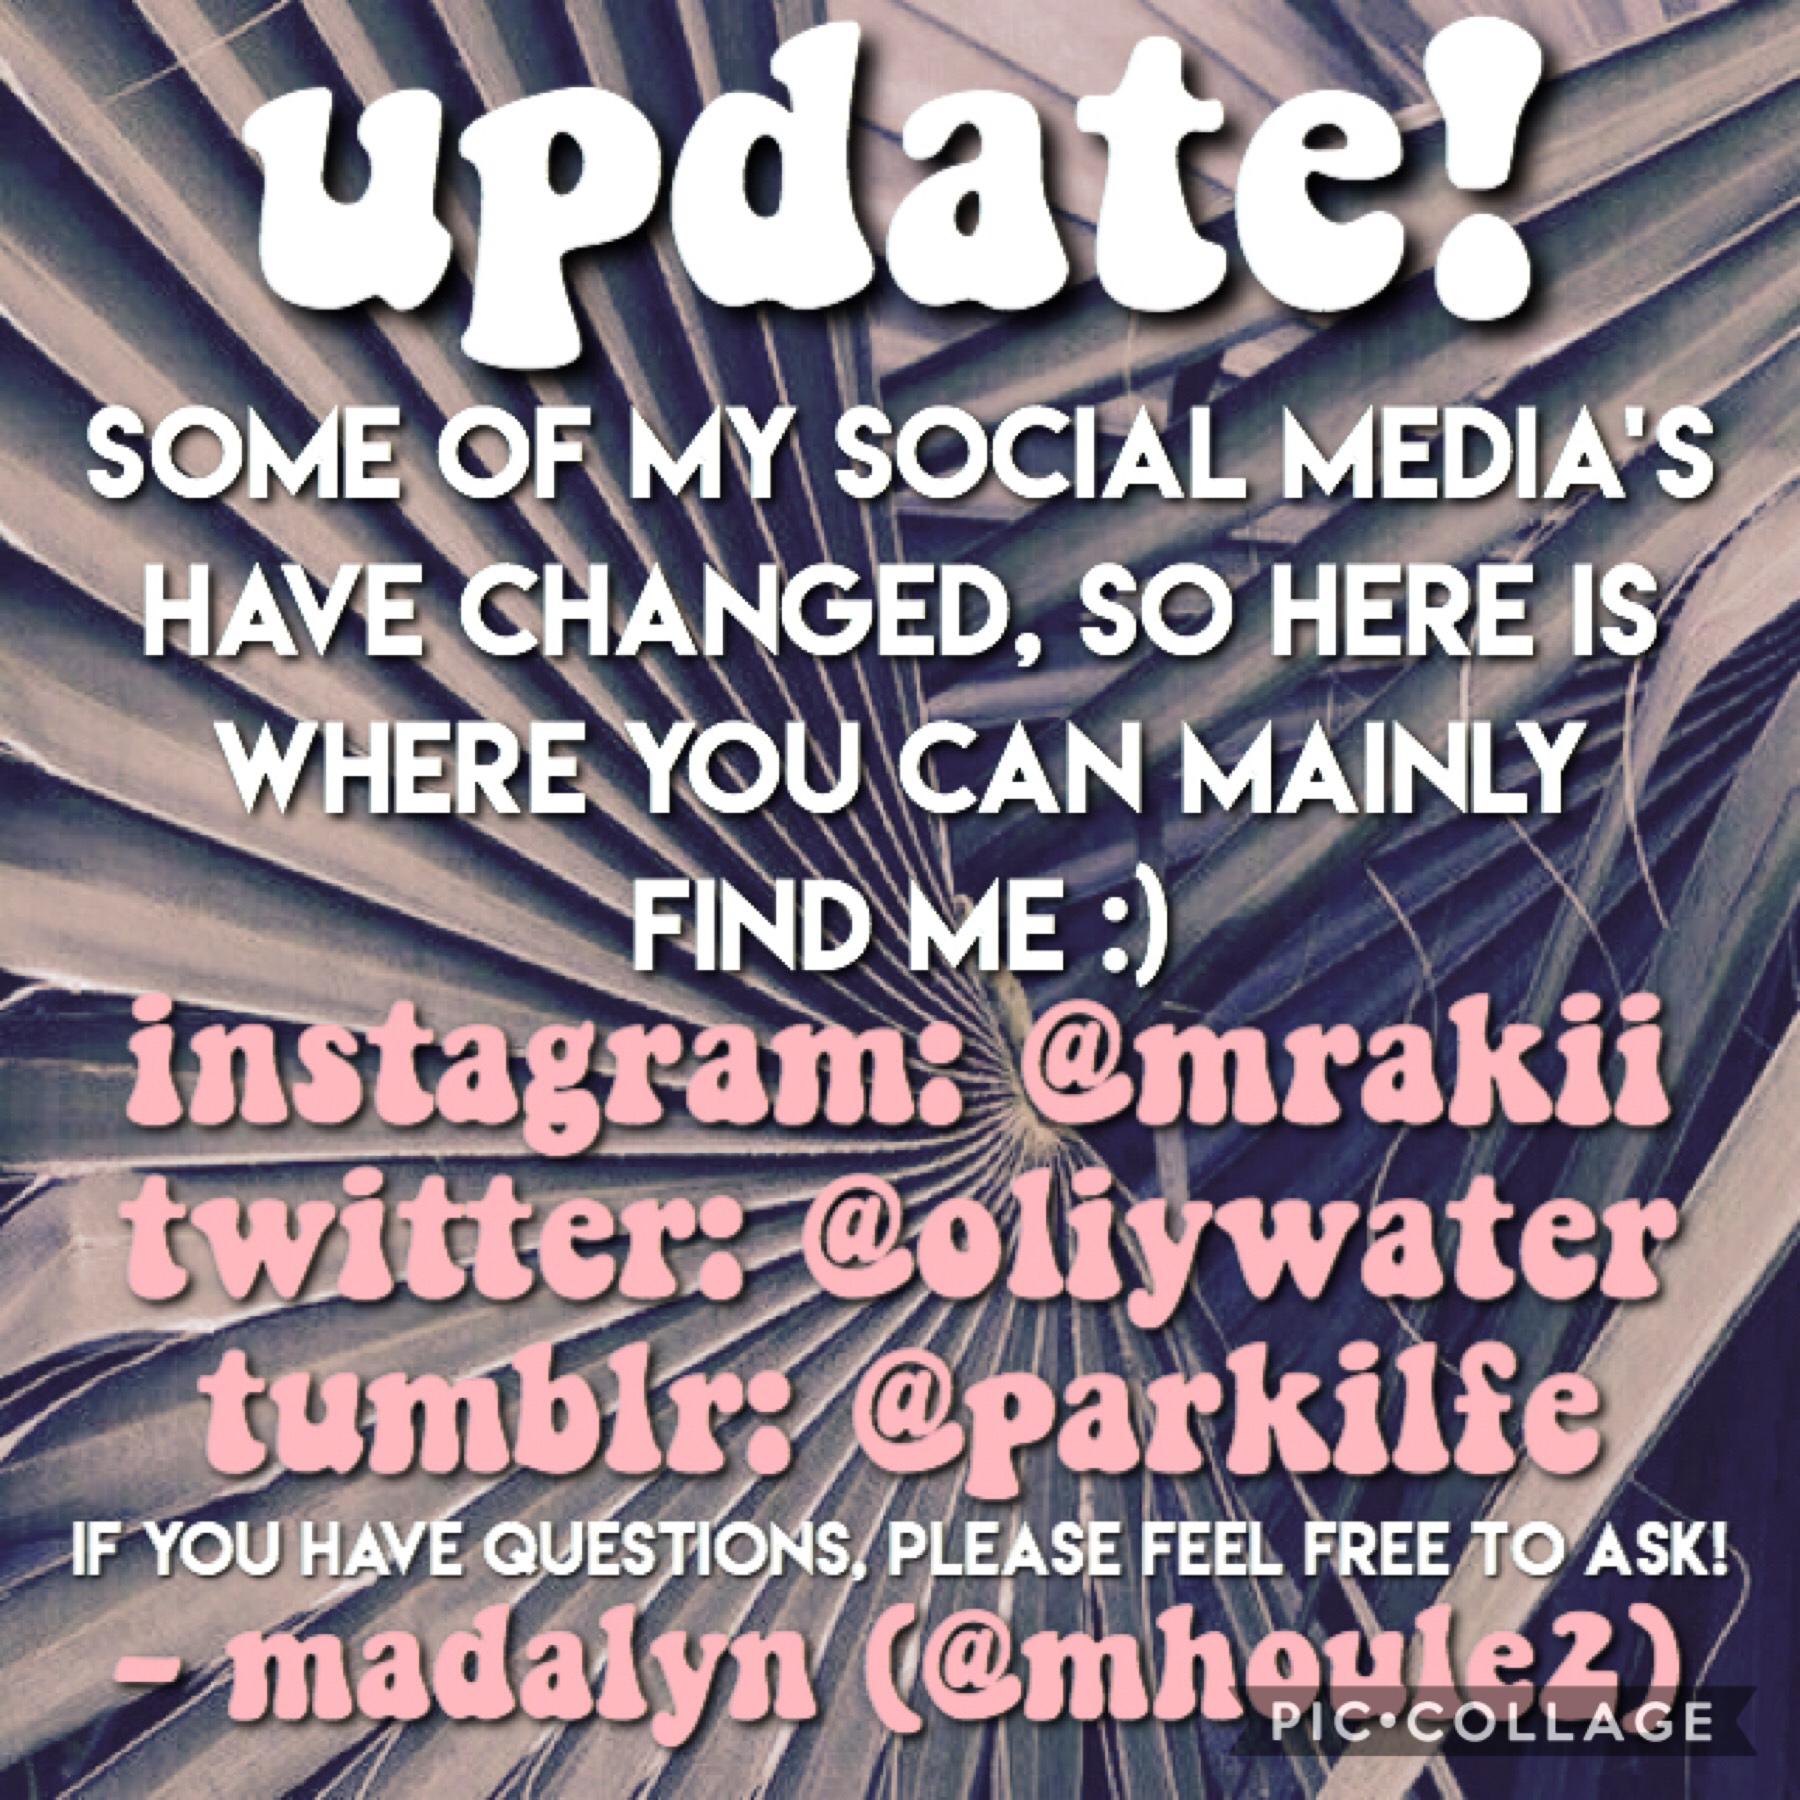 quick update! {click}
you are still welcome to follow my other social media’s listed in the last post, but I wanted to let you know that some things have changed and this is where u can mainly find me and keep in touch with me. Thank you! <3